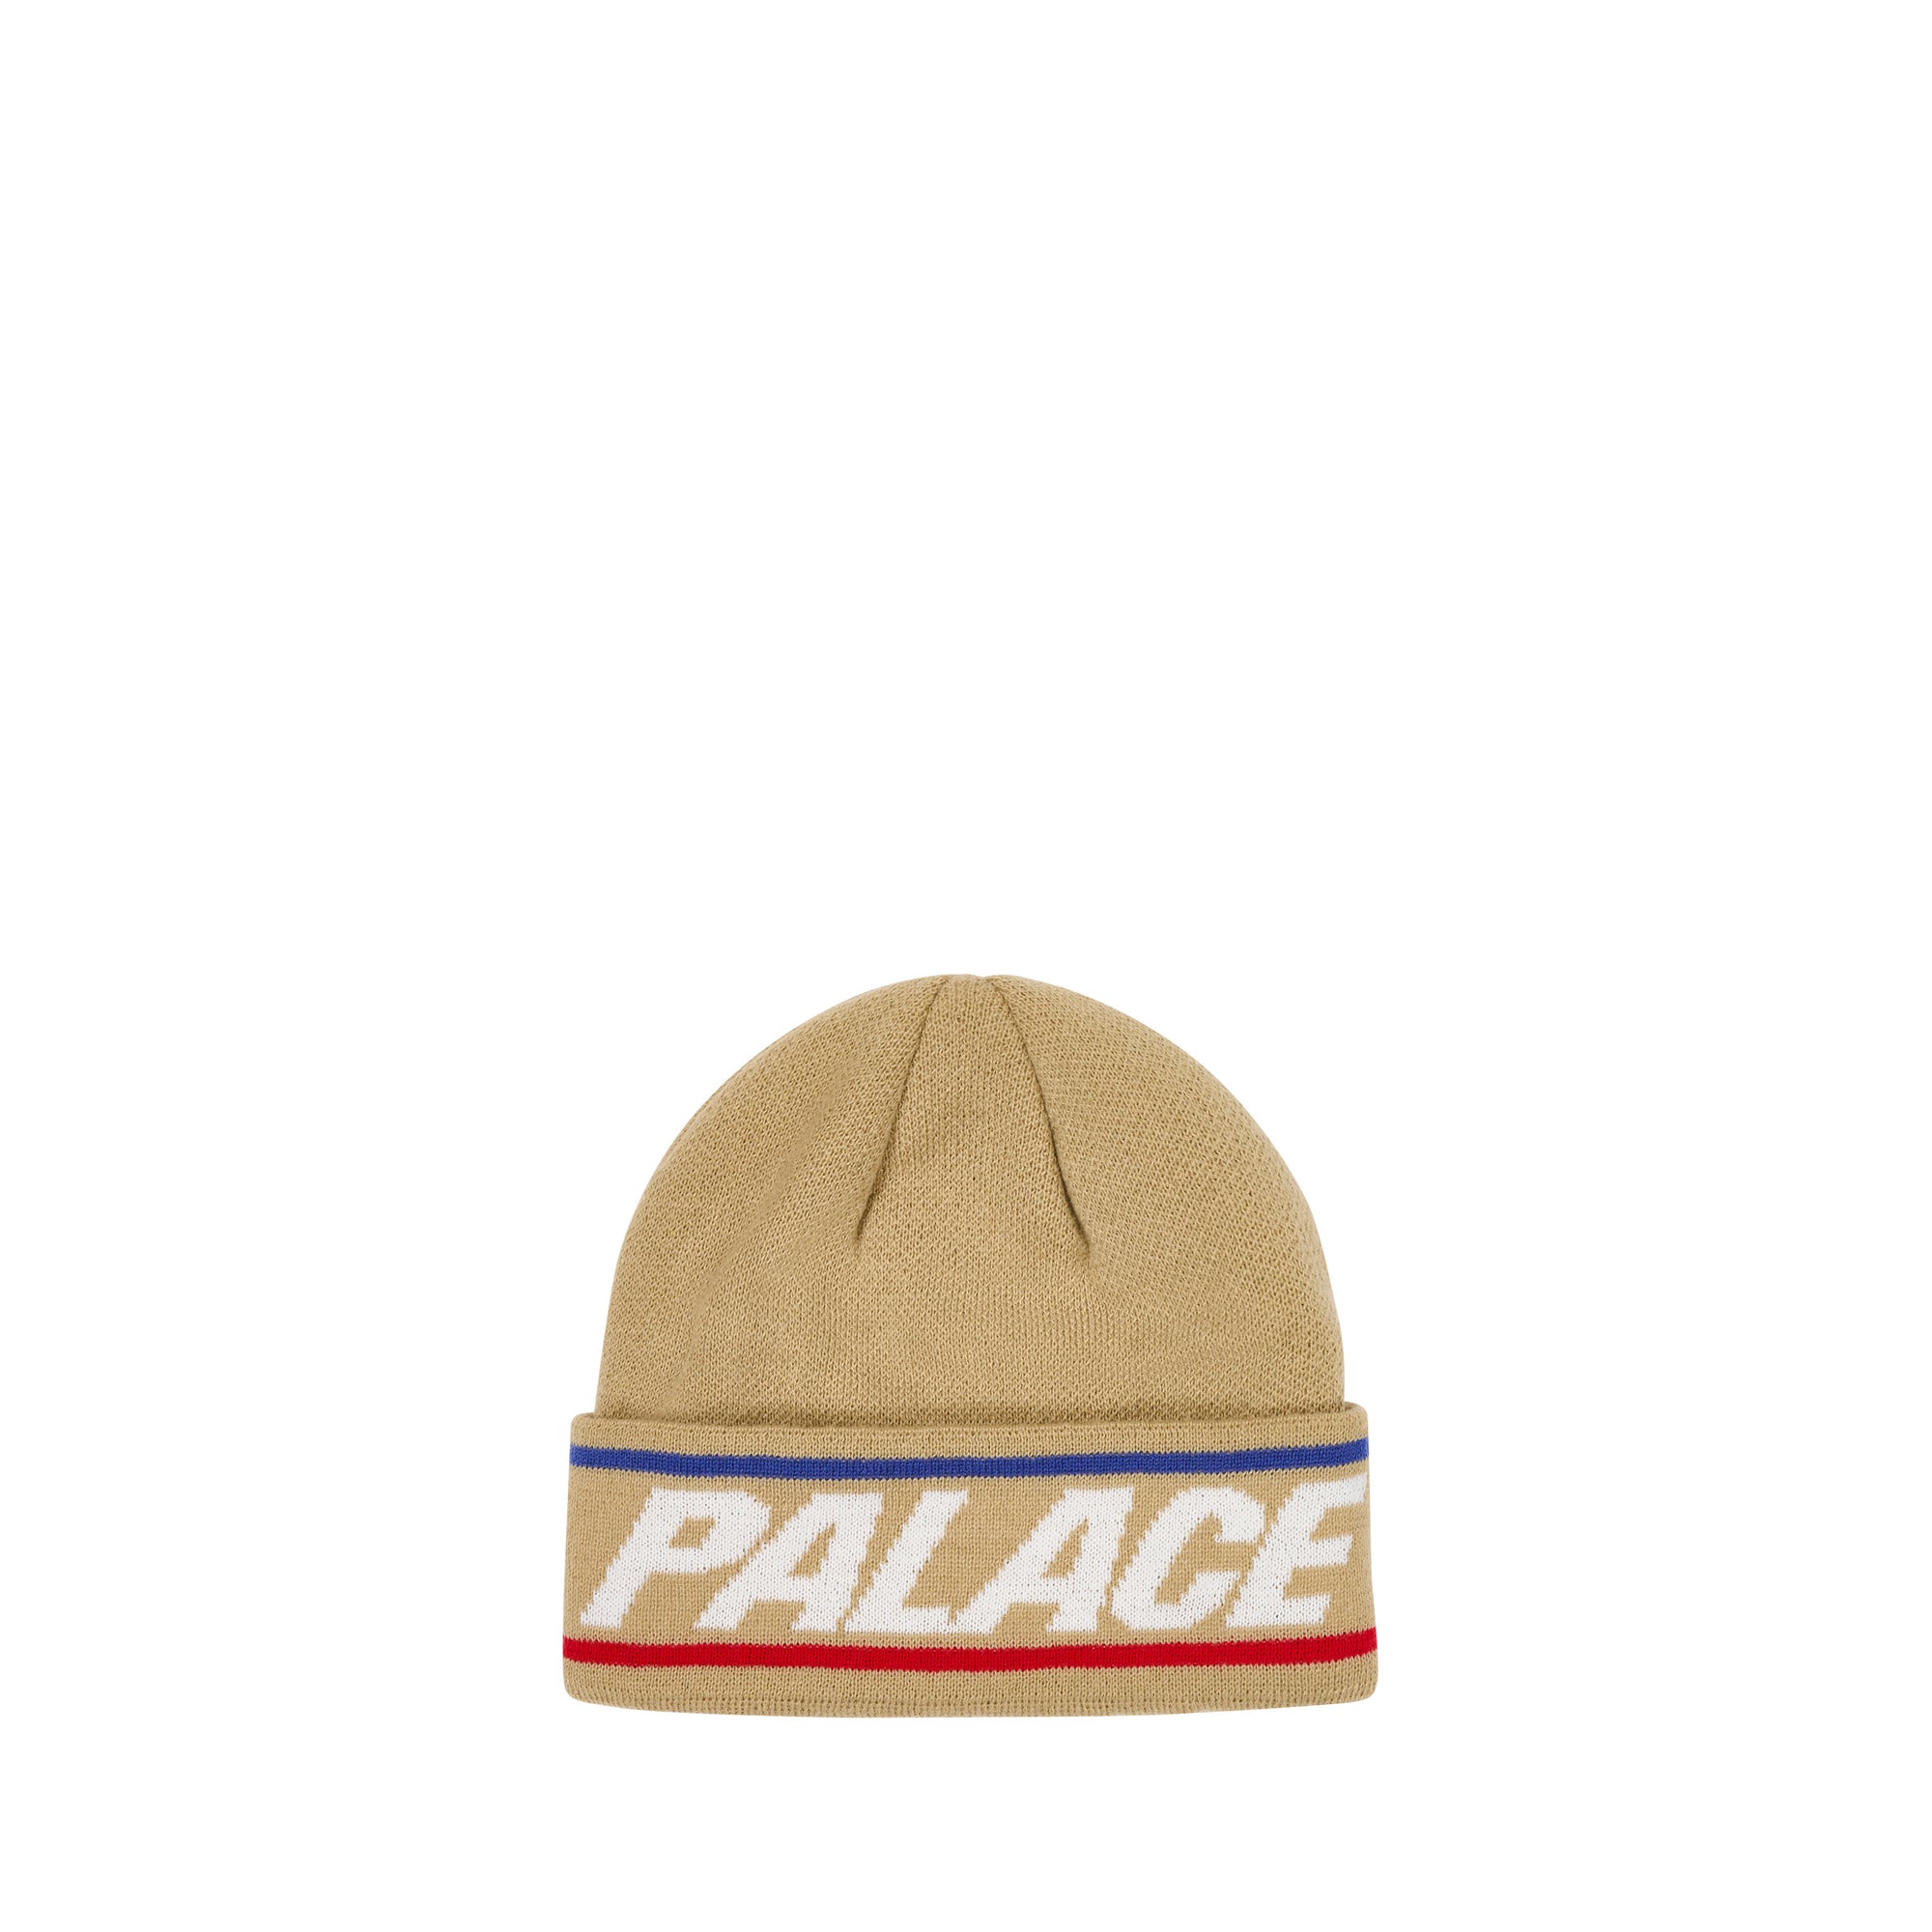 Palace - Basically A Beanie - (Stone) view 1